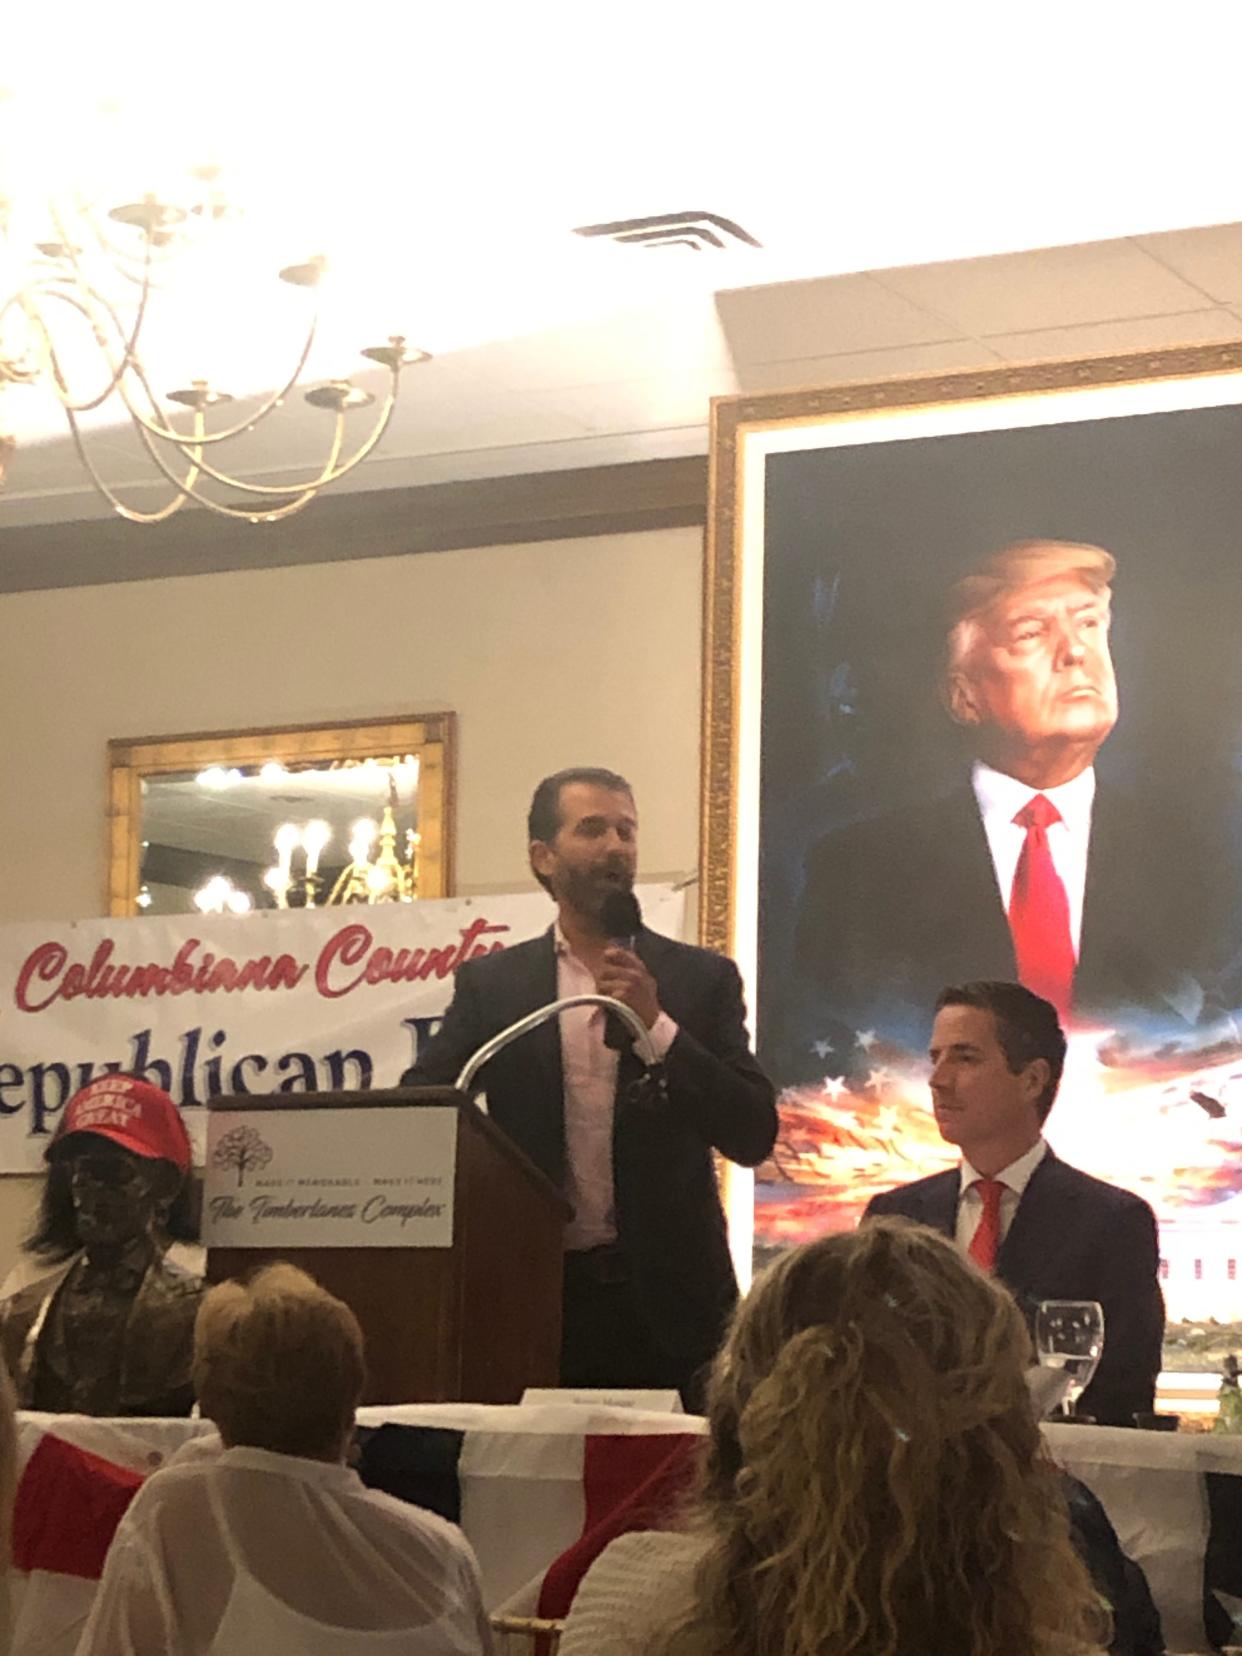 Donald Trump Jr., the eldest son of former President Donald Trump, speaks Wednesday at the annual Lincoln Day Dinner for the Columbiana County Republican Party in Salem.